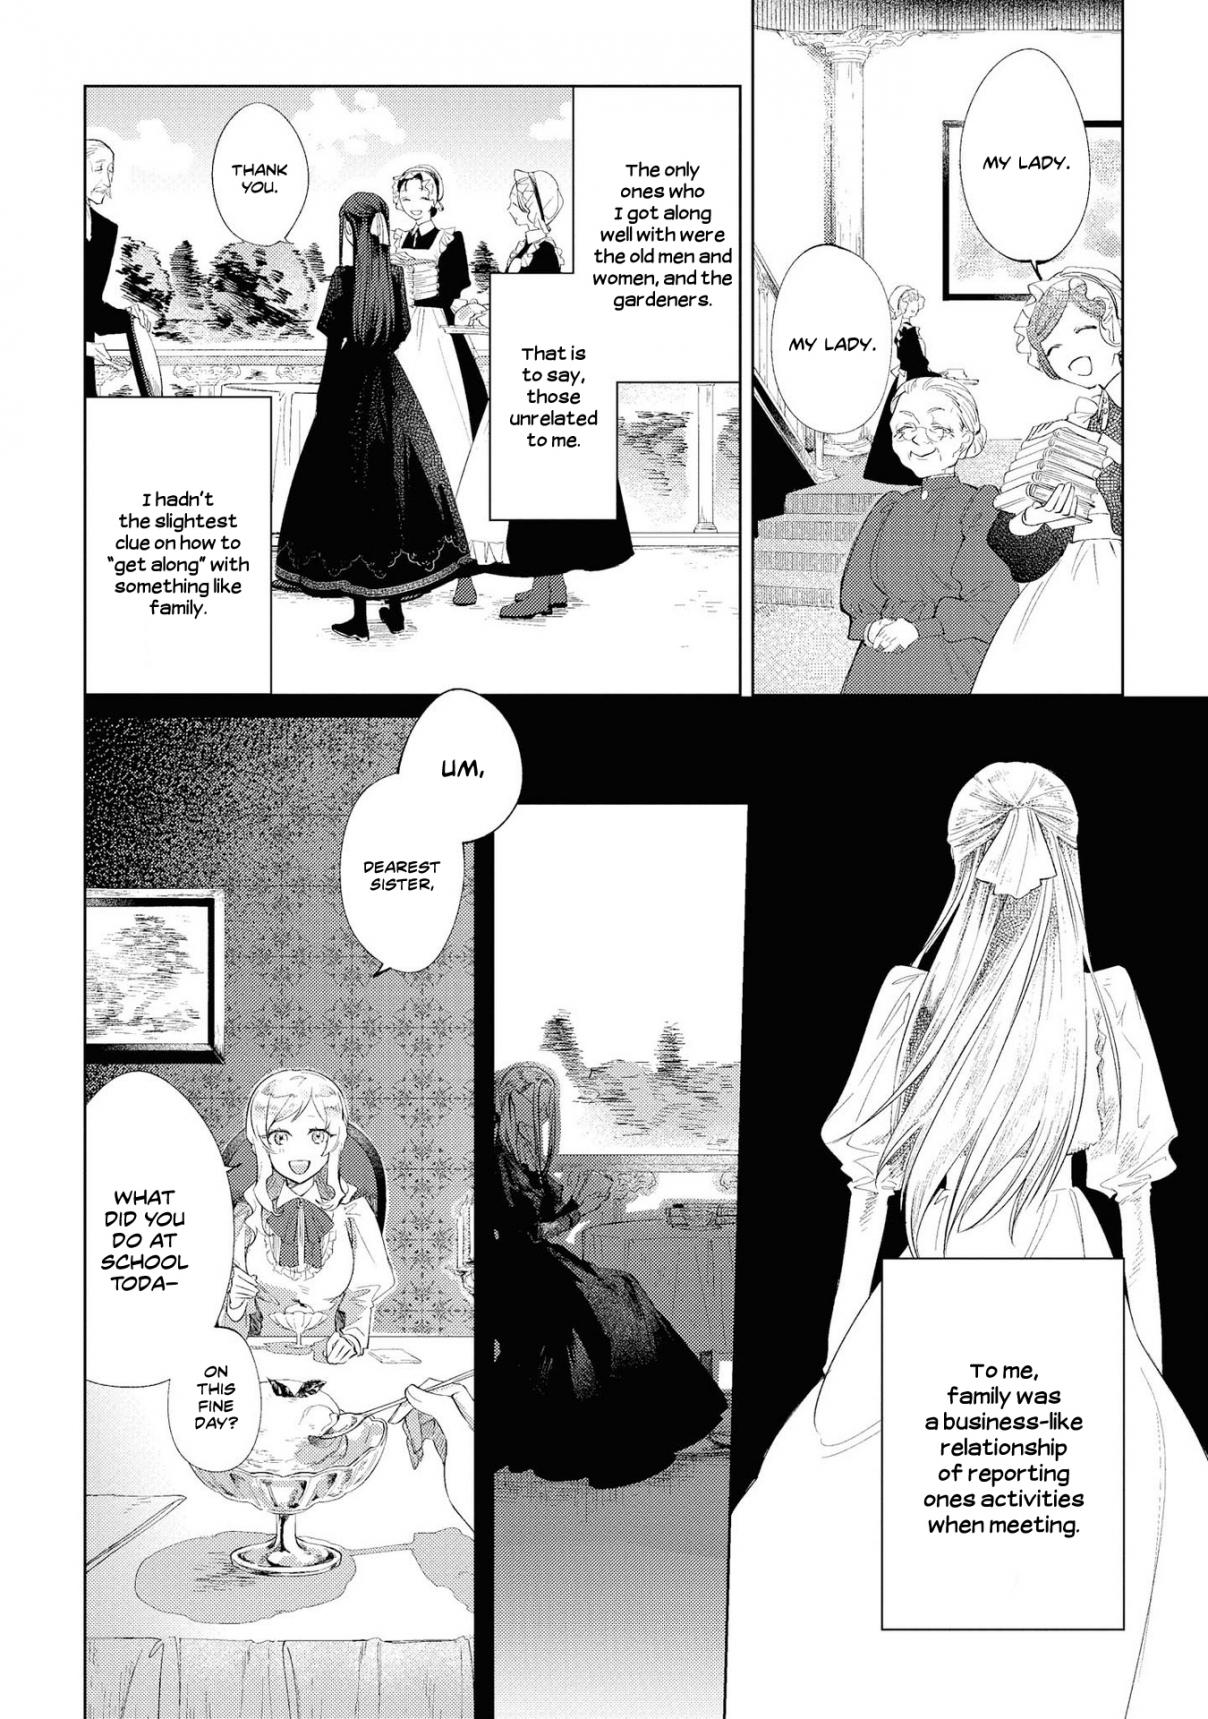 Though I May Be a Villainess, I'll Show You I Can Obtain Happiness! Vol. 1 Ch. 2 The Tale of the Noble Girl who will go to a Monastery after her Engagement Annulment